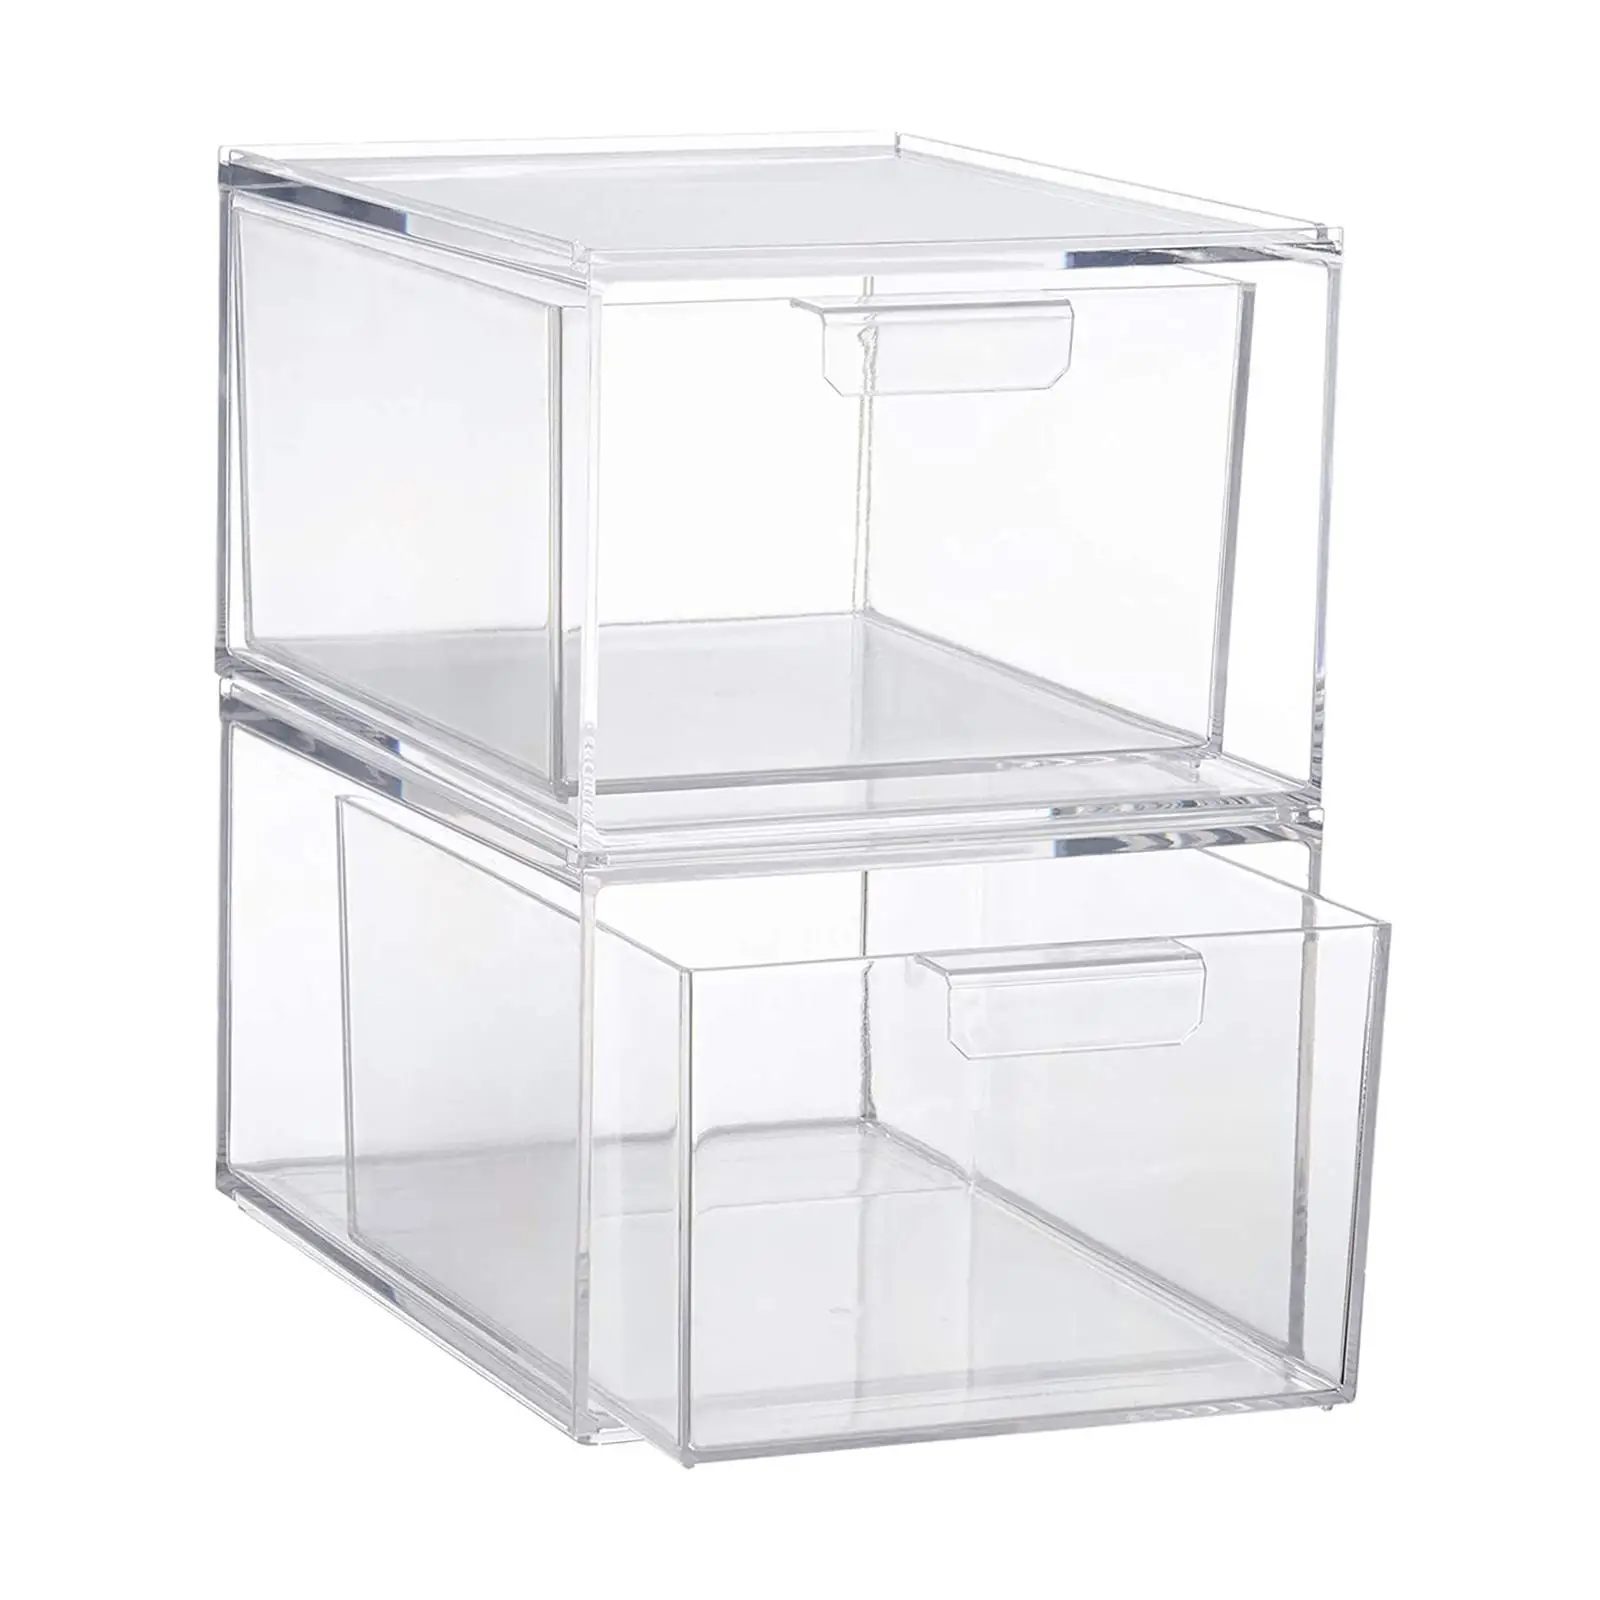 2x Clear Storage Box Organizing Desktop Sundries Container Acrylic Storage Container for Hair Accessories Jewelry Cosmetics